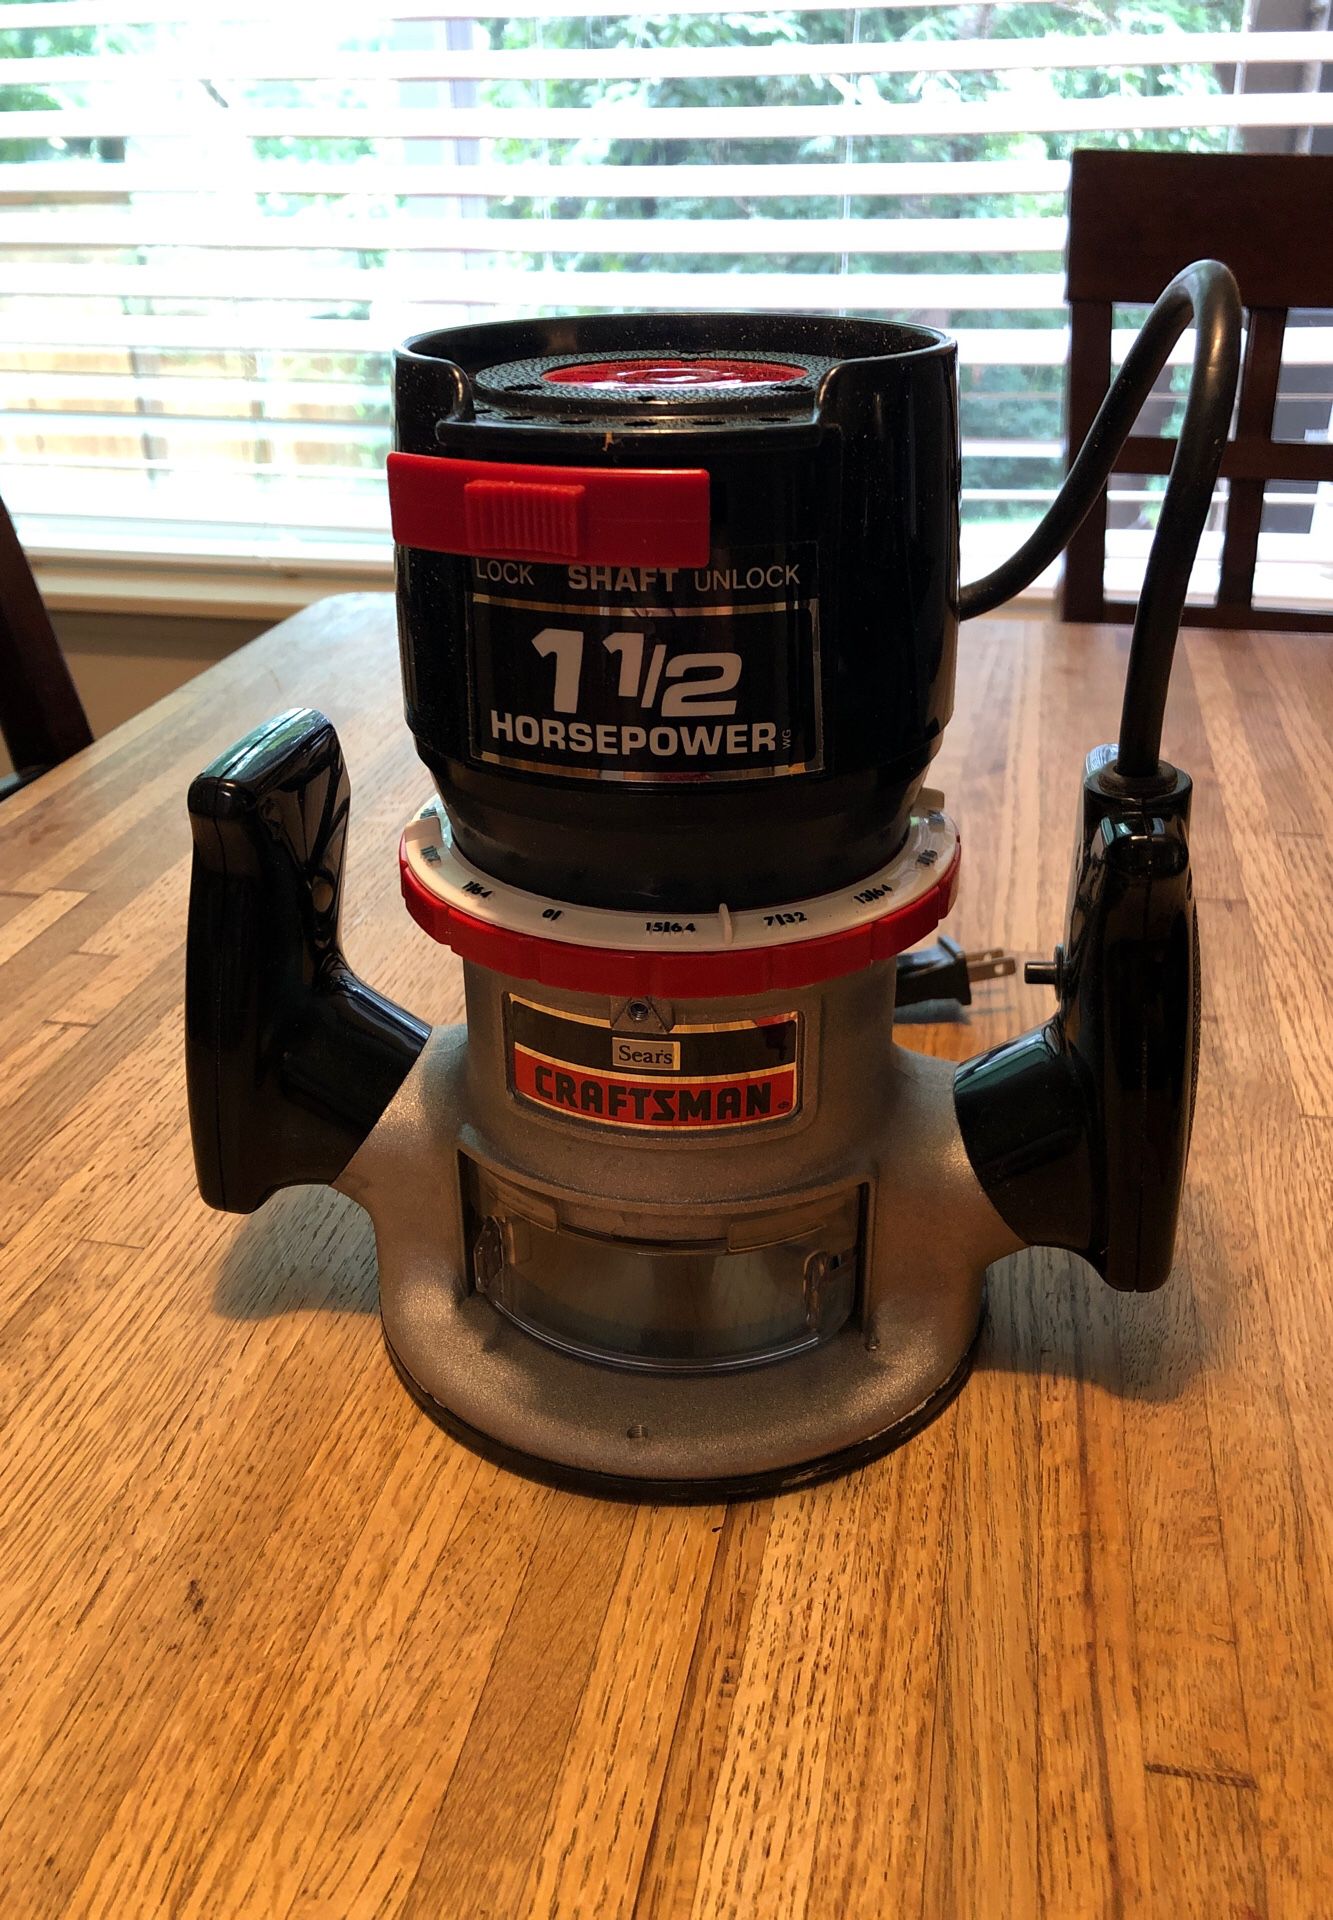 Craftsman sears wood router 1 1/2HP